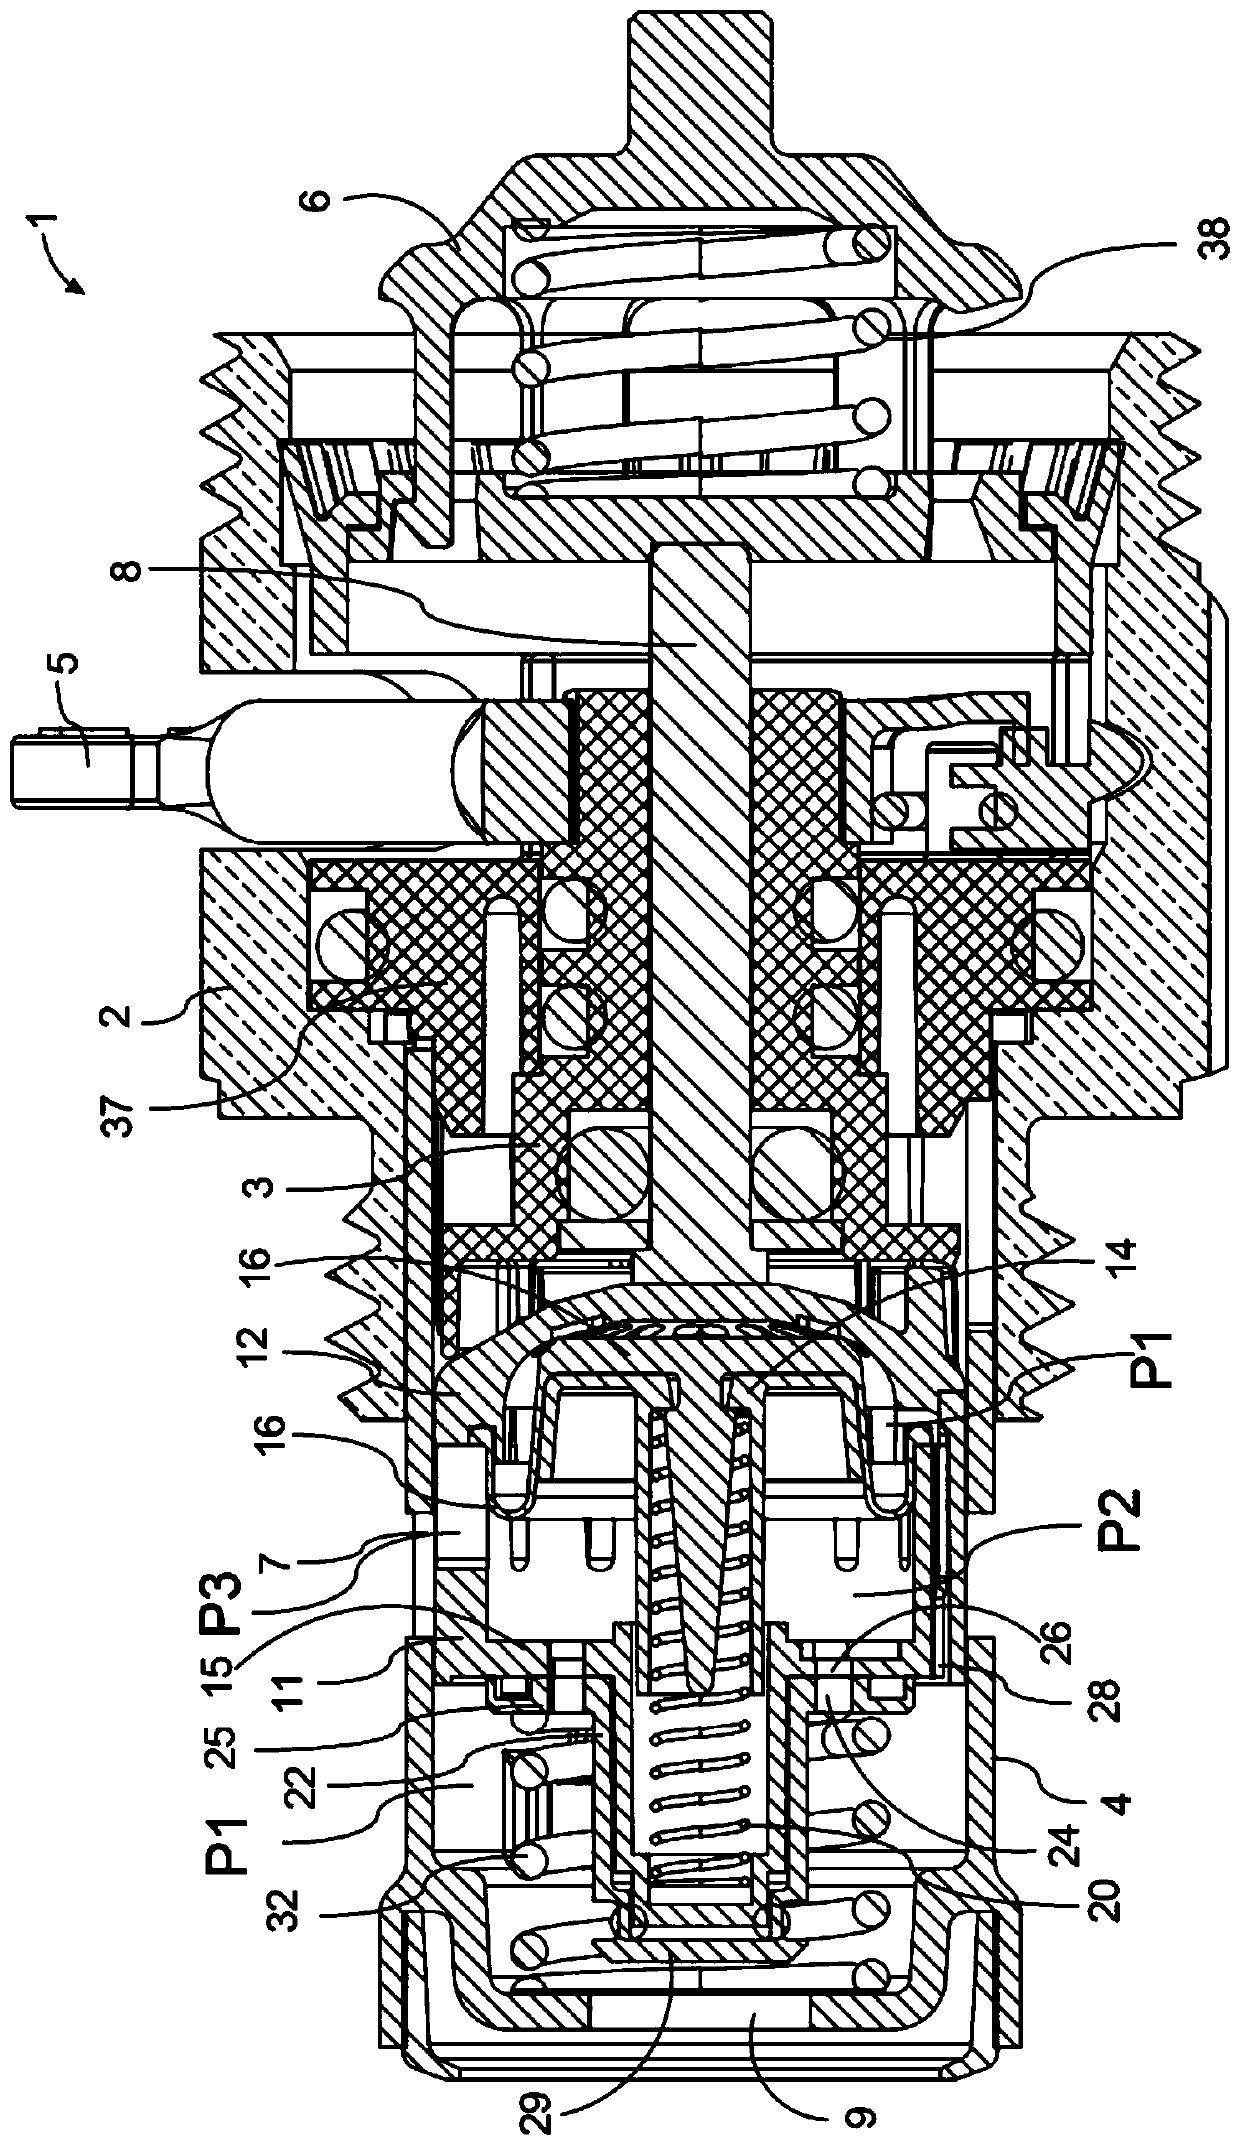 Control valve for heating and/or cooling system